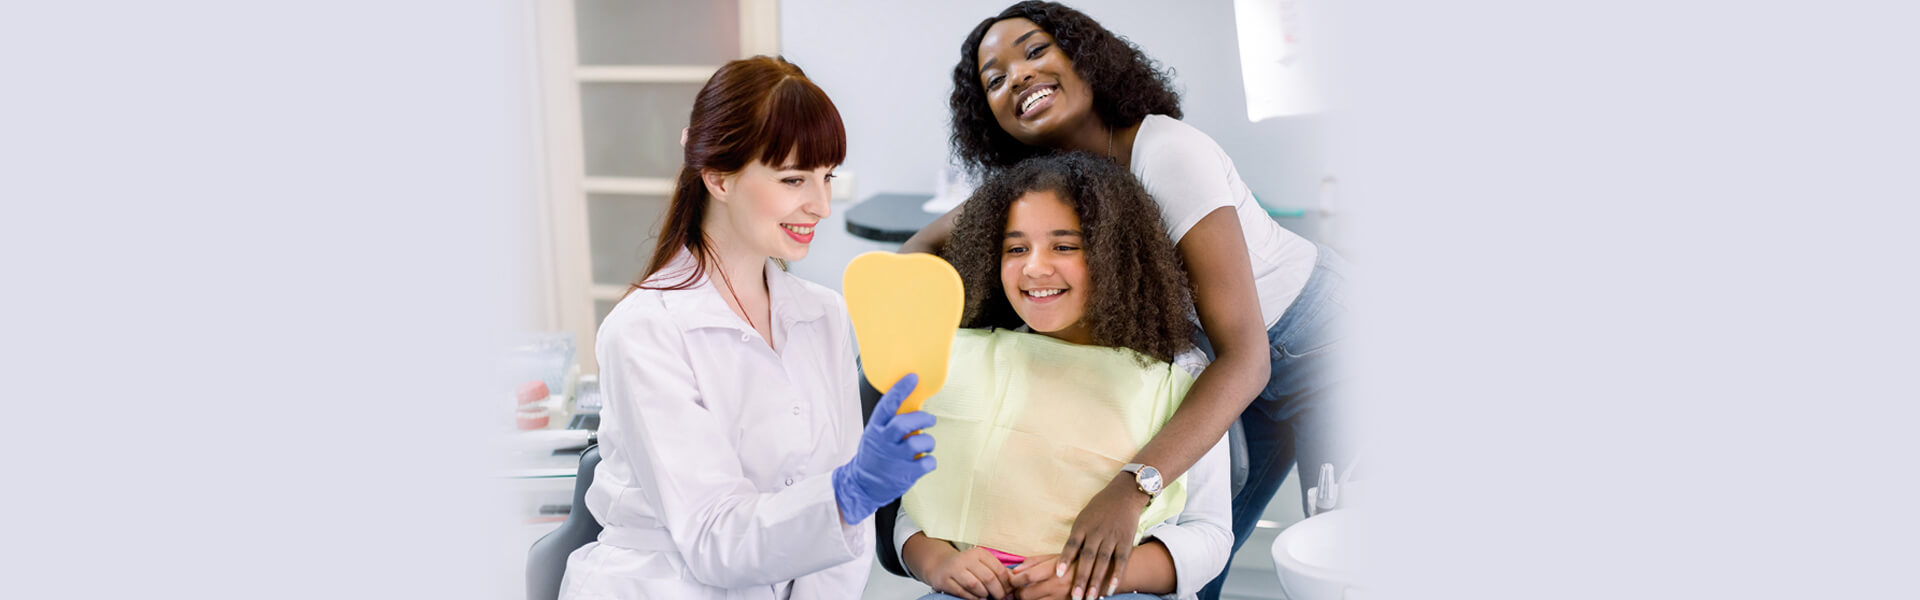 How Much Does a Dental Cleaning Cost?